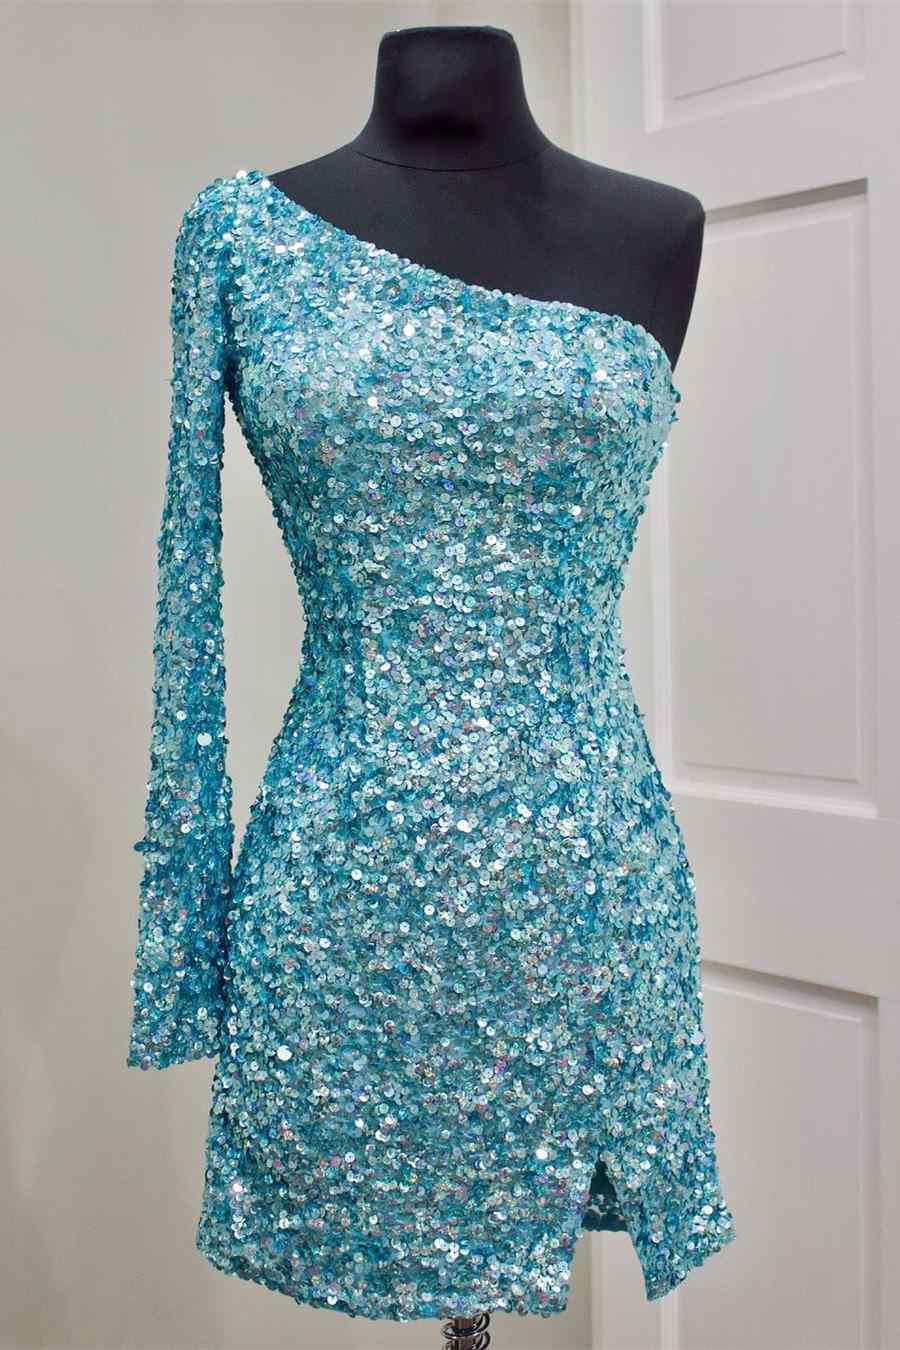 LTP1318,Charming one shoulder sequined homecoming dresses mini cocktail dress